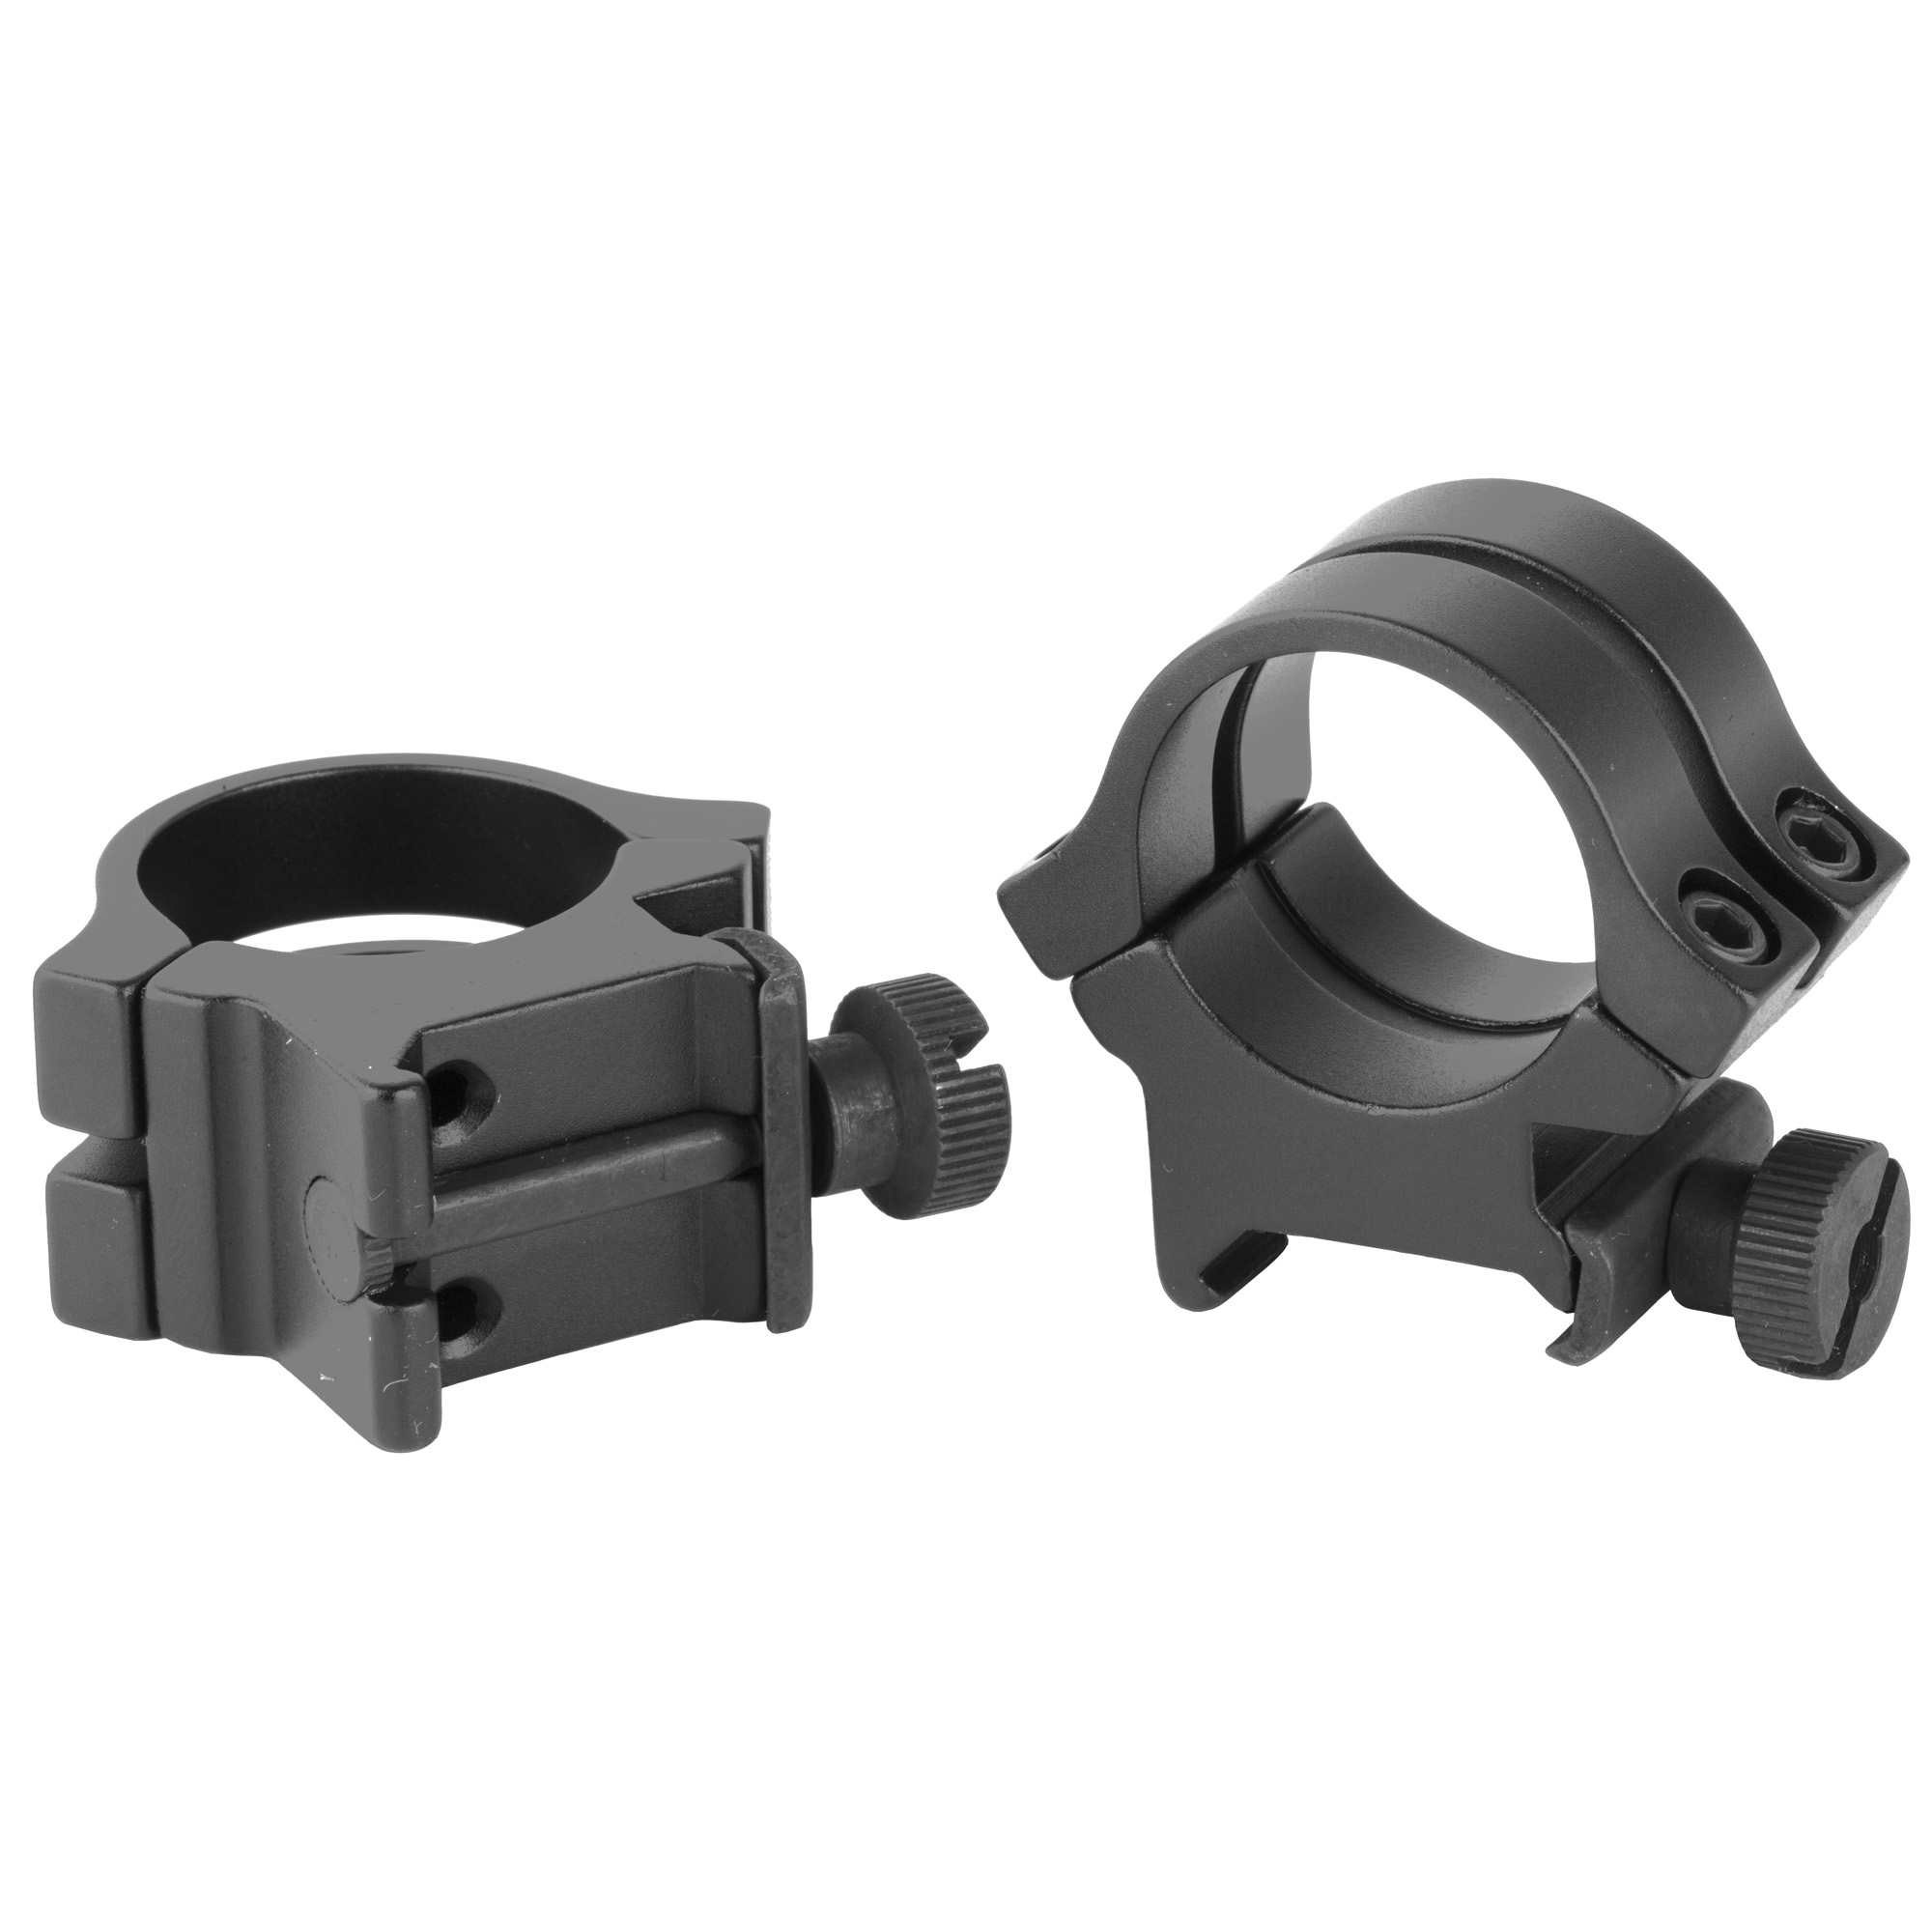 Simmons Weaver High Scope Rings With Matte Black Finish Md: 49047